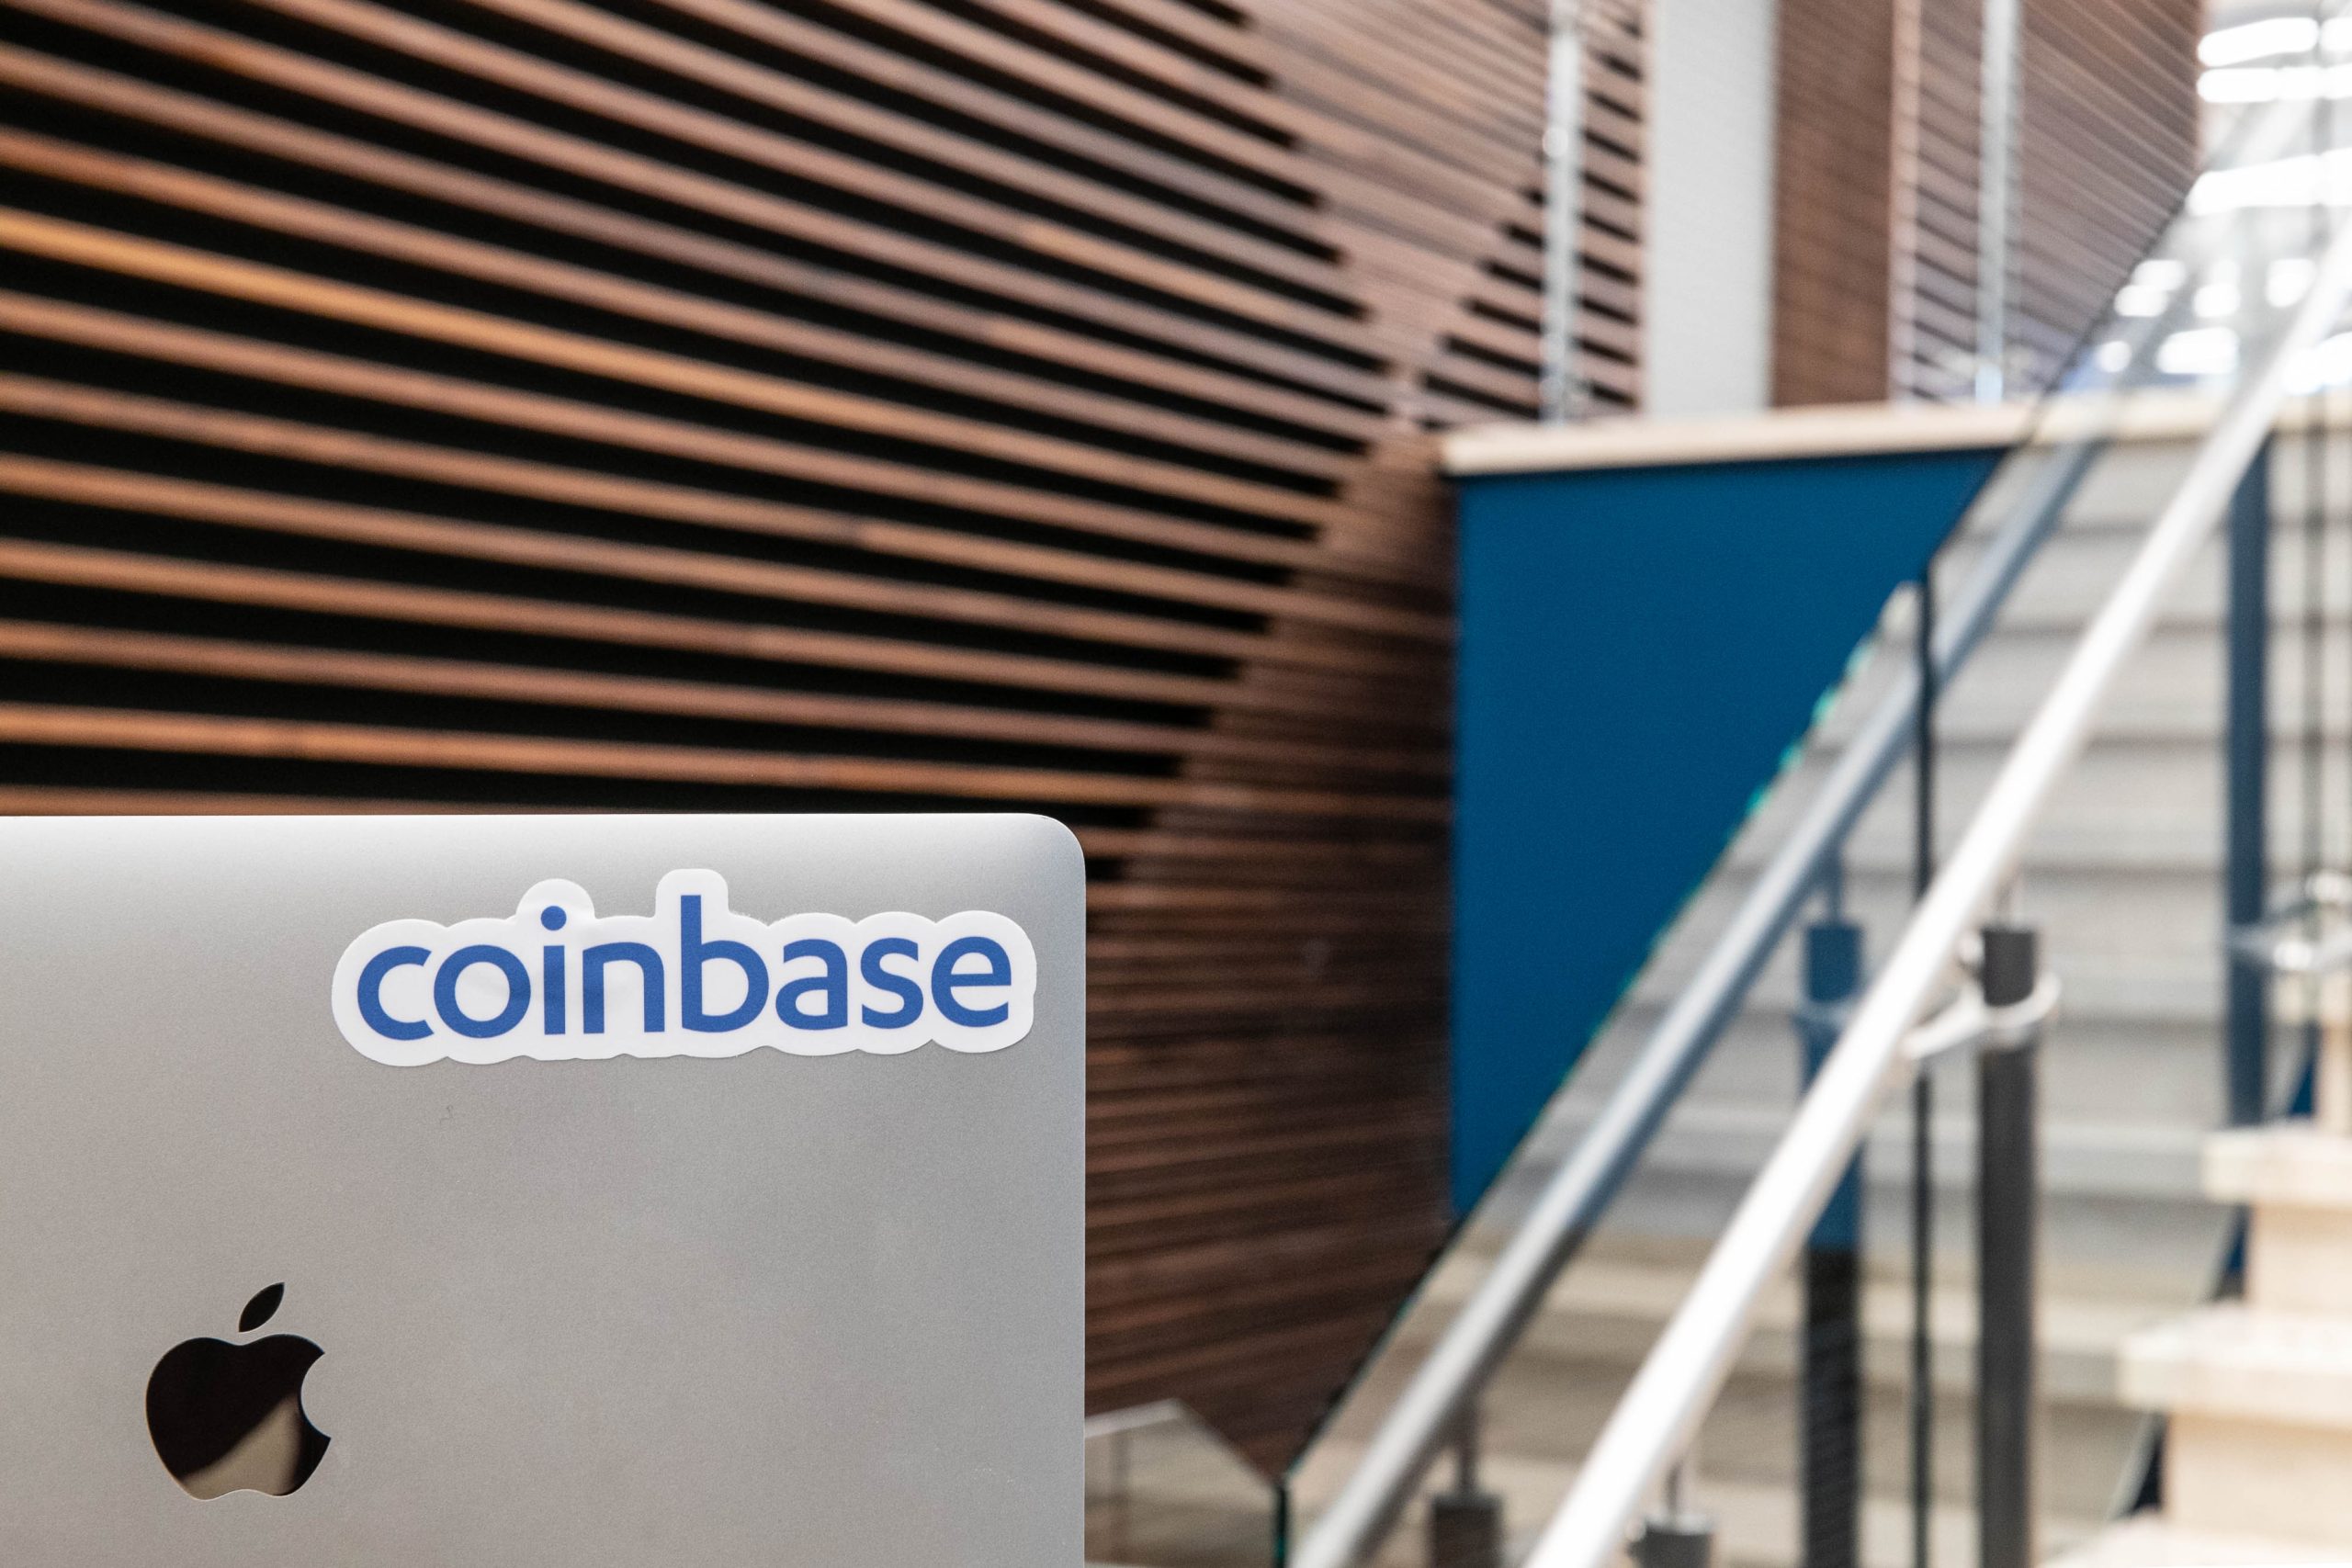 Coinbase Announces Launch of Perpetual Futures Contracts for Polkadot, Internet Computer, and NEAR Protocol